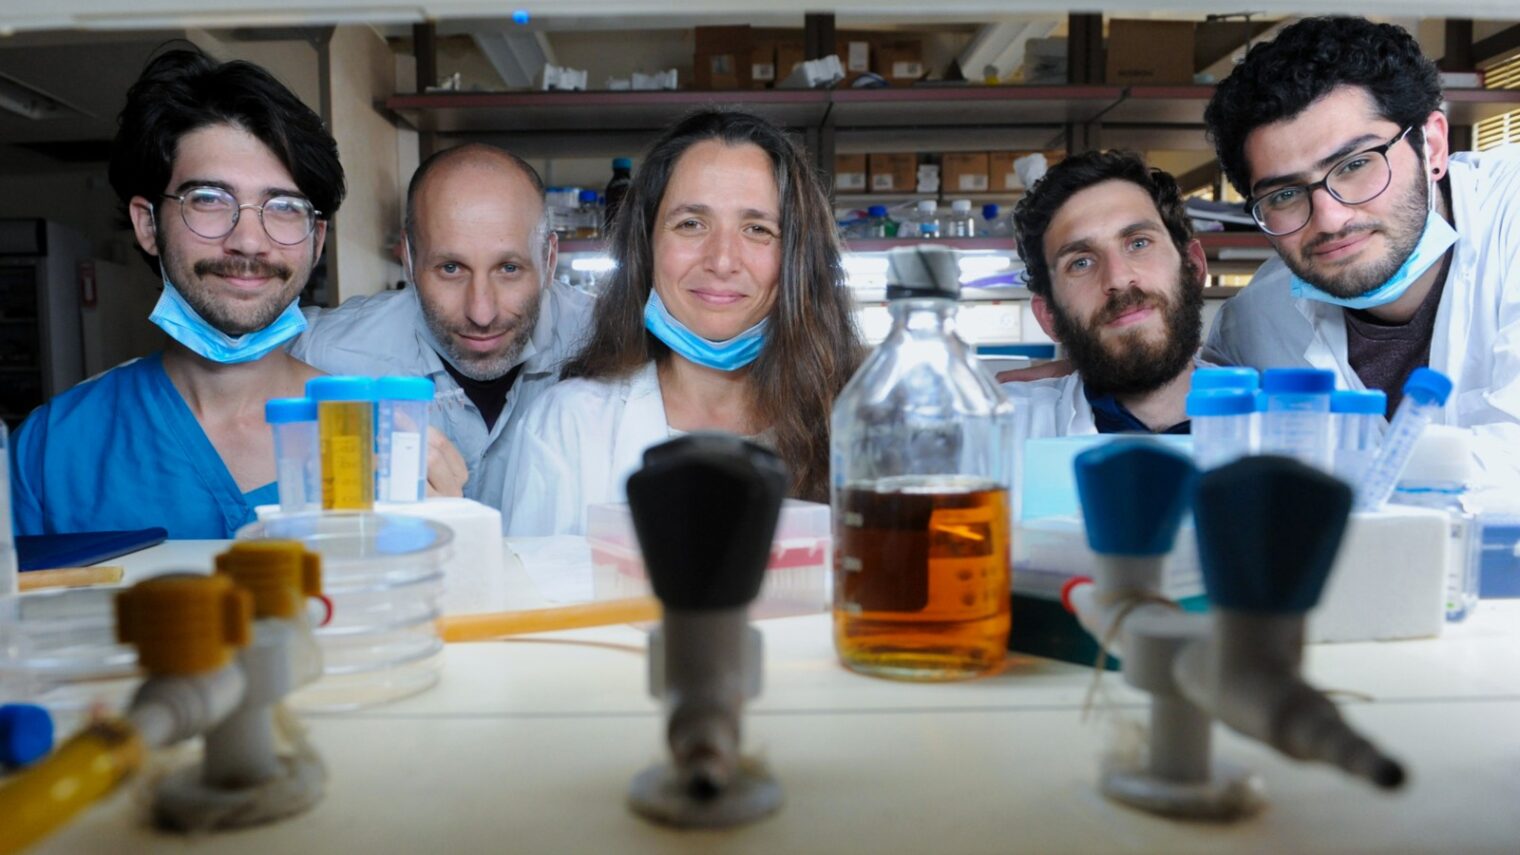 Technion Prof. Naama Geva-Zatorsky and team have developed a rapid test kit for COVID-19. Photo: courtesy